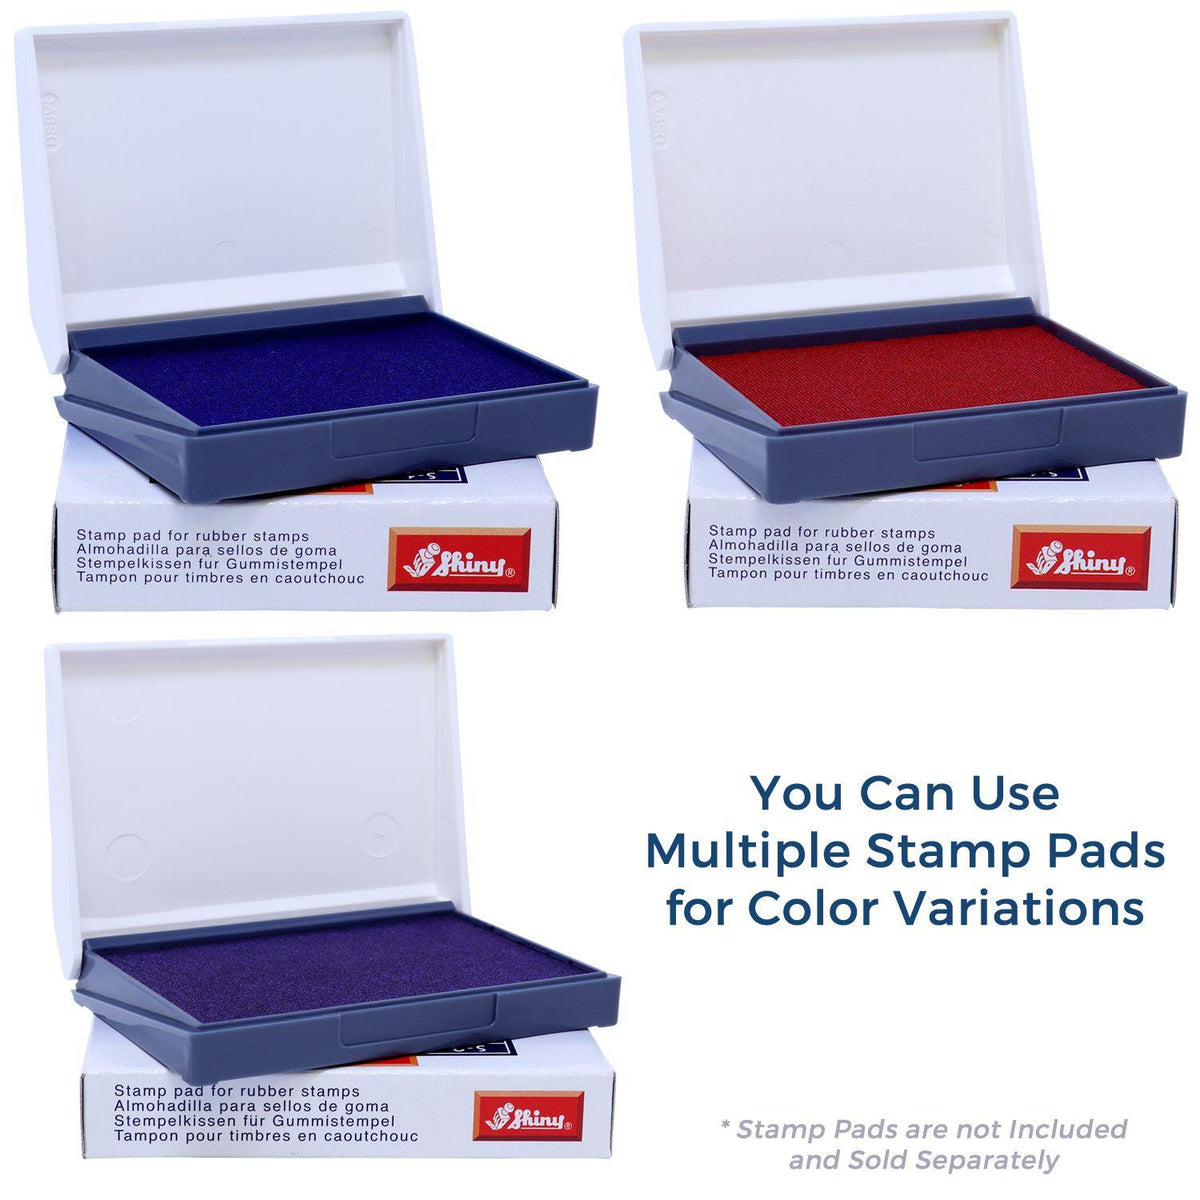 Stamp Pads for Large Covid-19 Patient Rubber Stamp Available